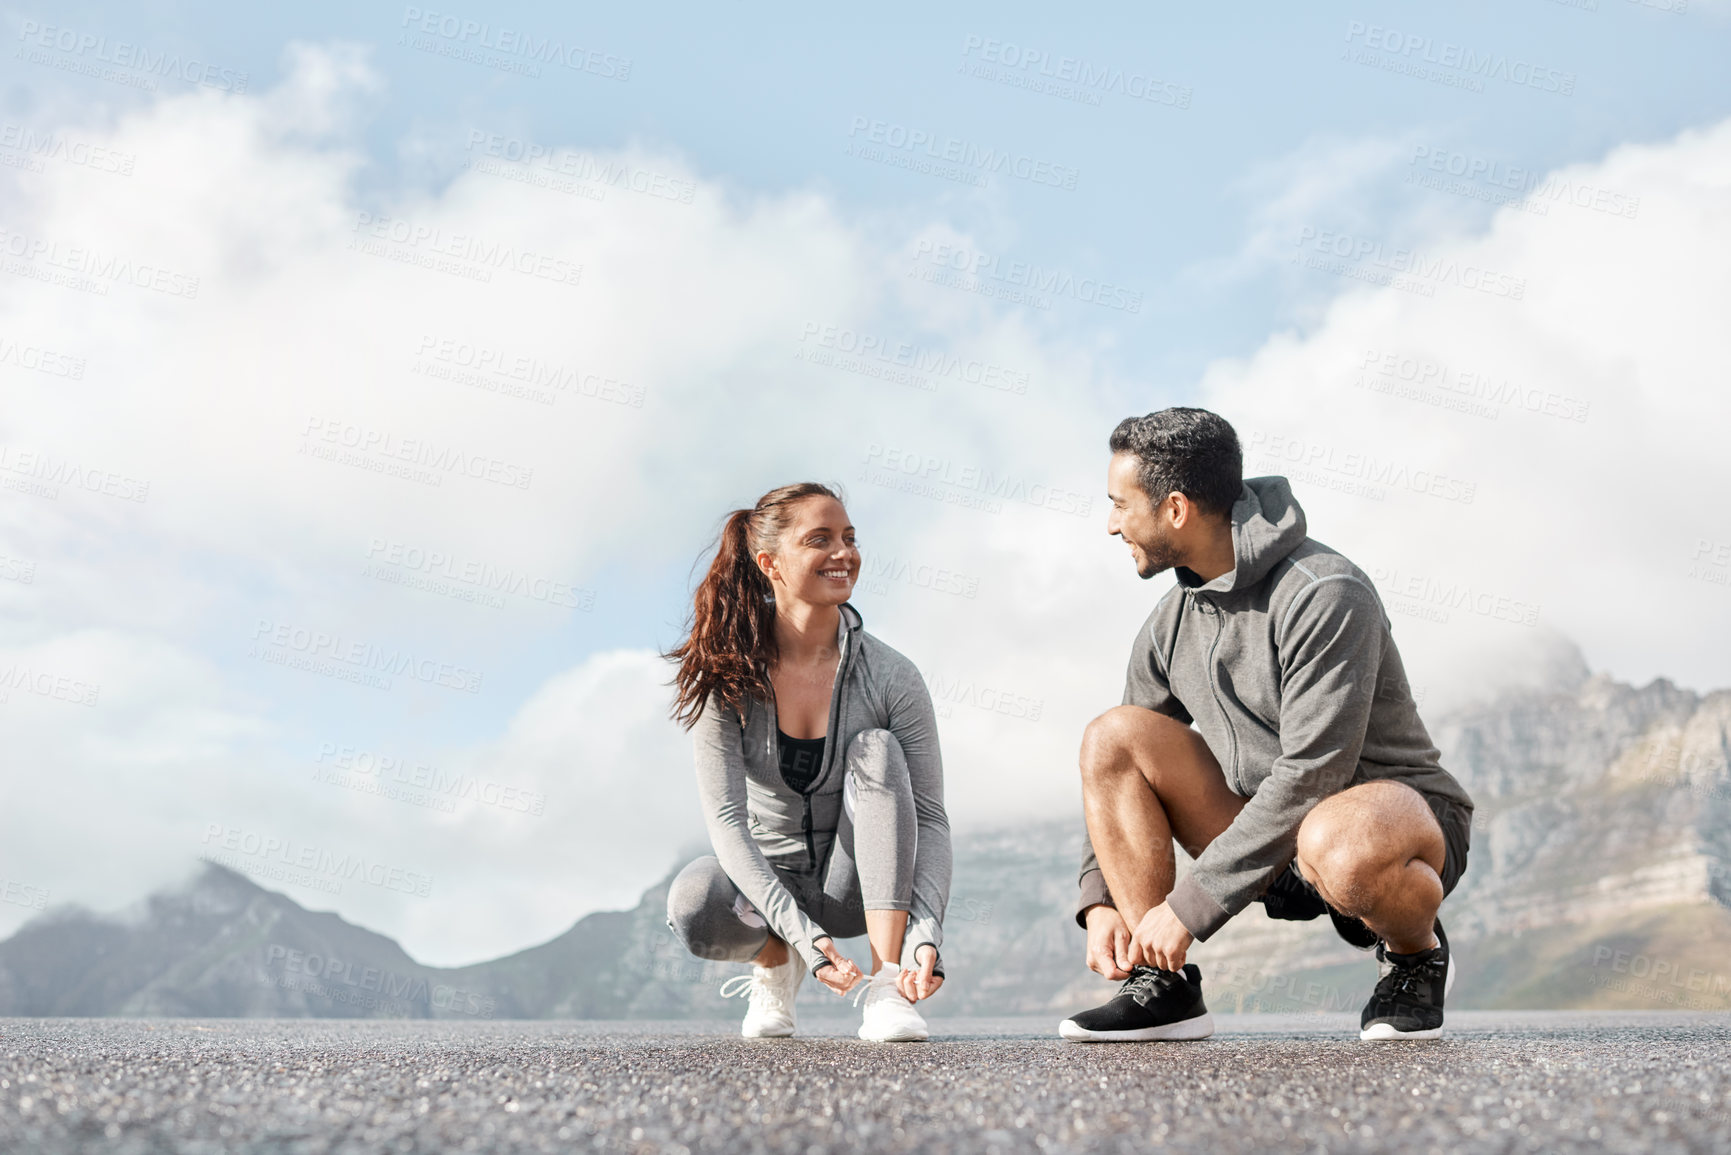 Buy stock photo Shot of a sporty young man and woman tying their shoelaces while exercising outdoors